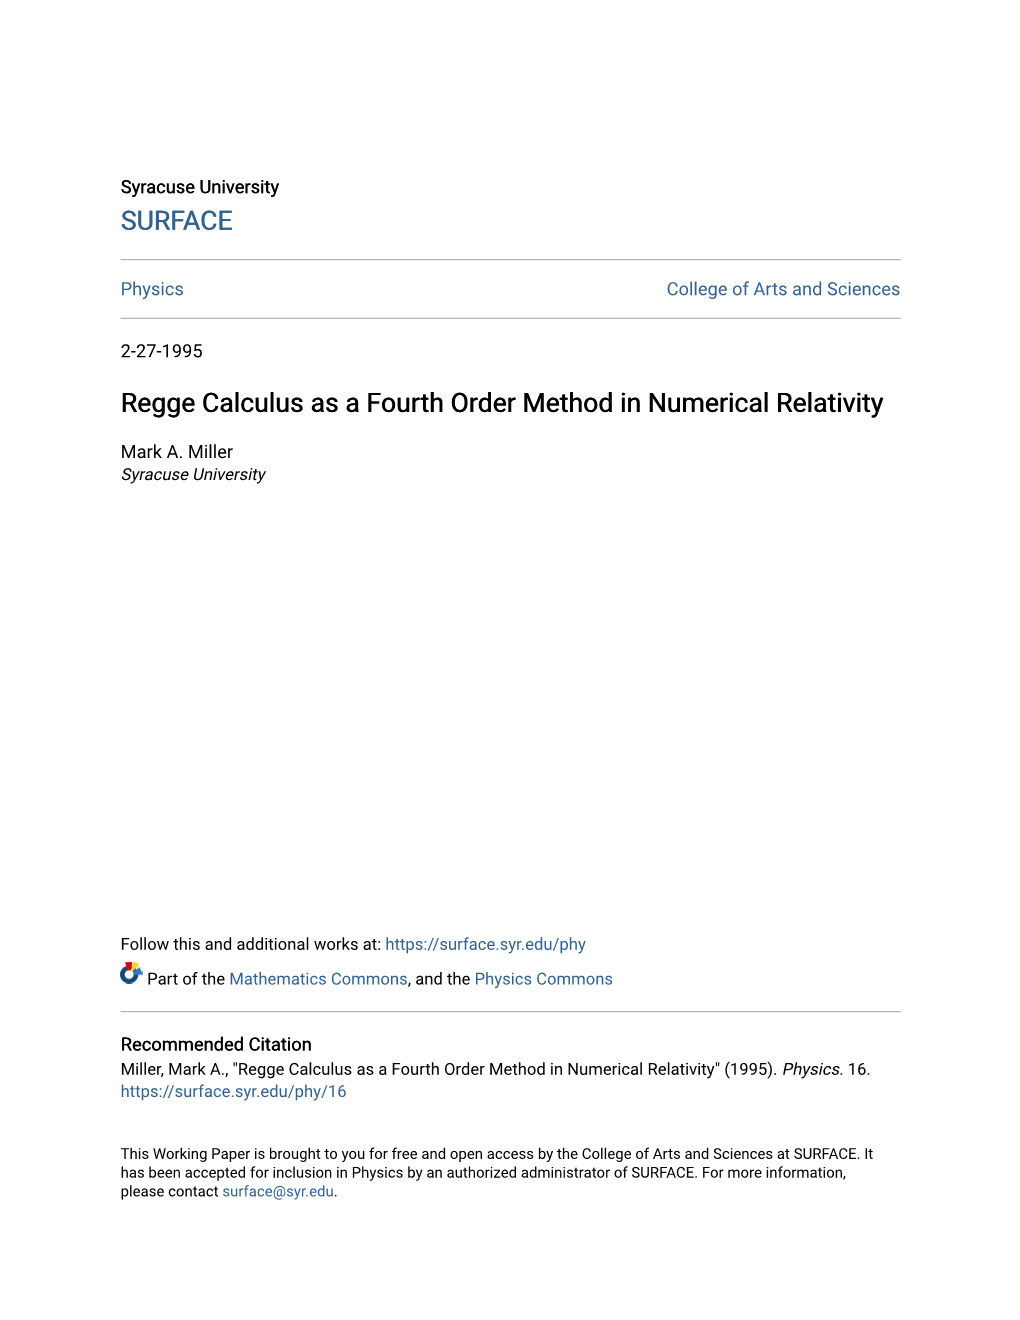 Regge Calculus As a Fourth Order Method in Numerical Relativity